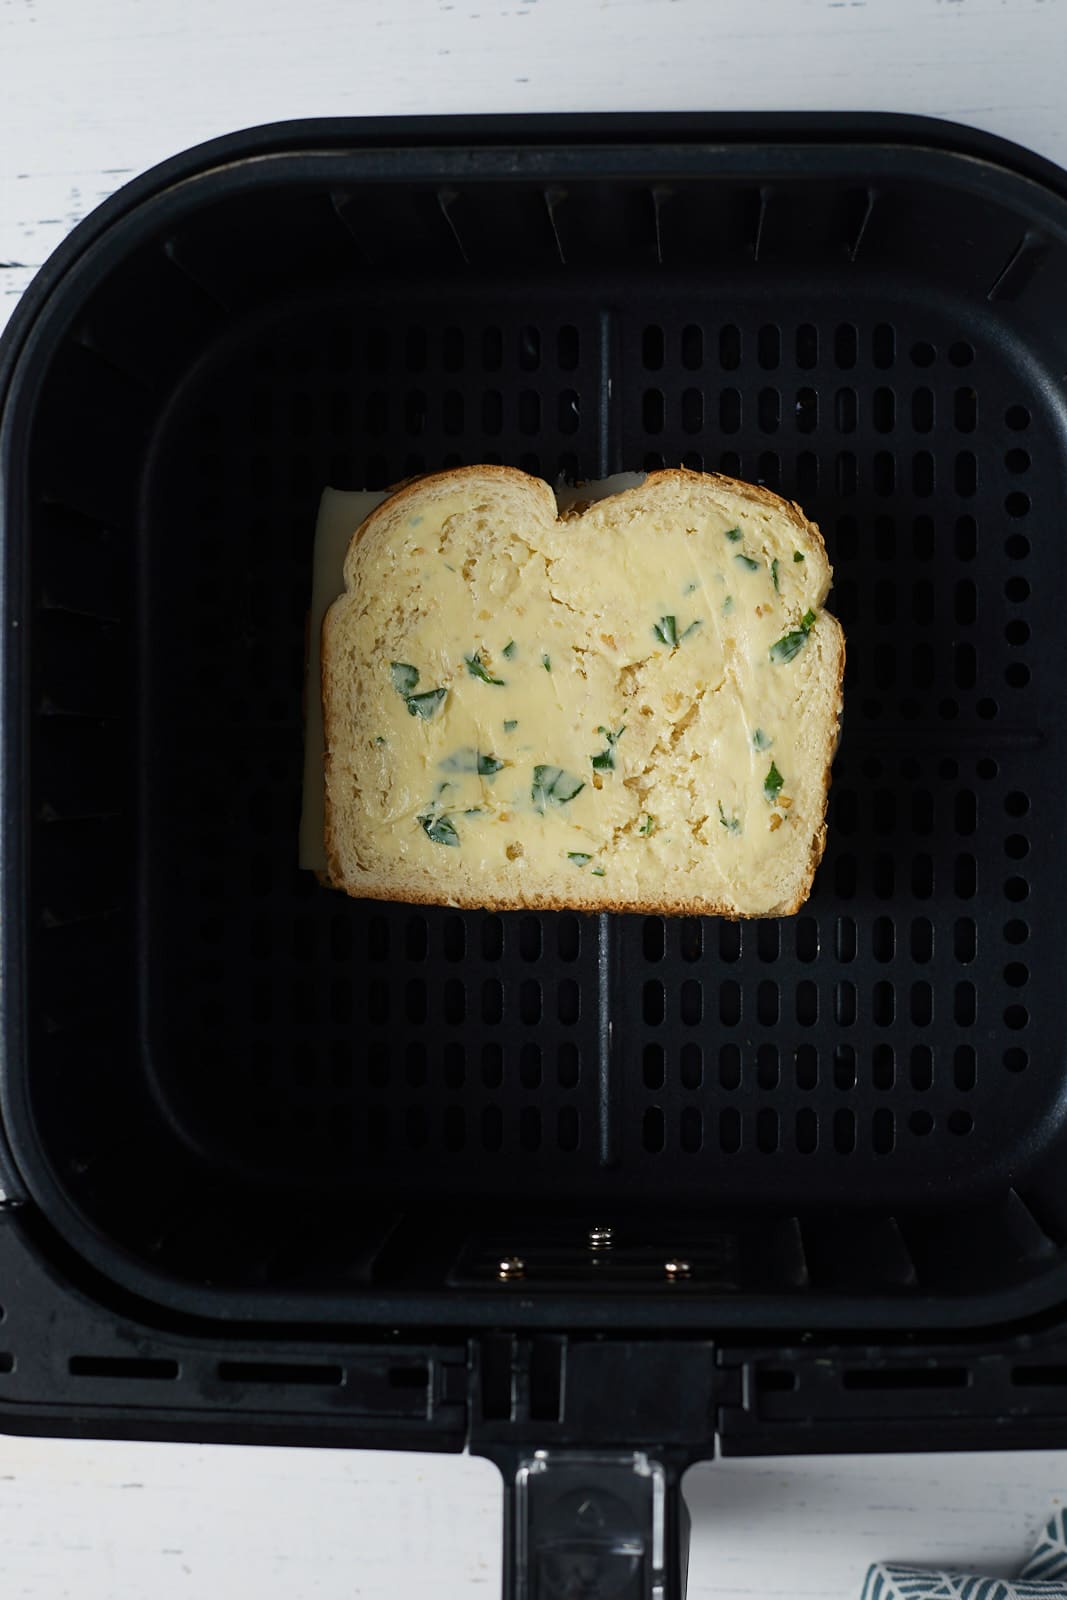 A grilled cheese in the air fryer basket before being cooked.